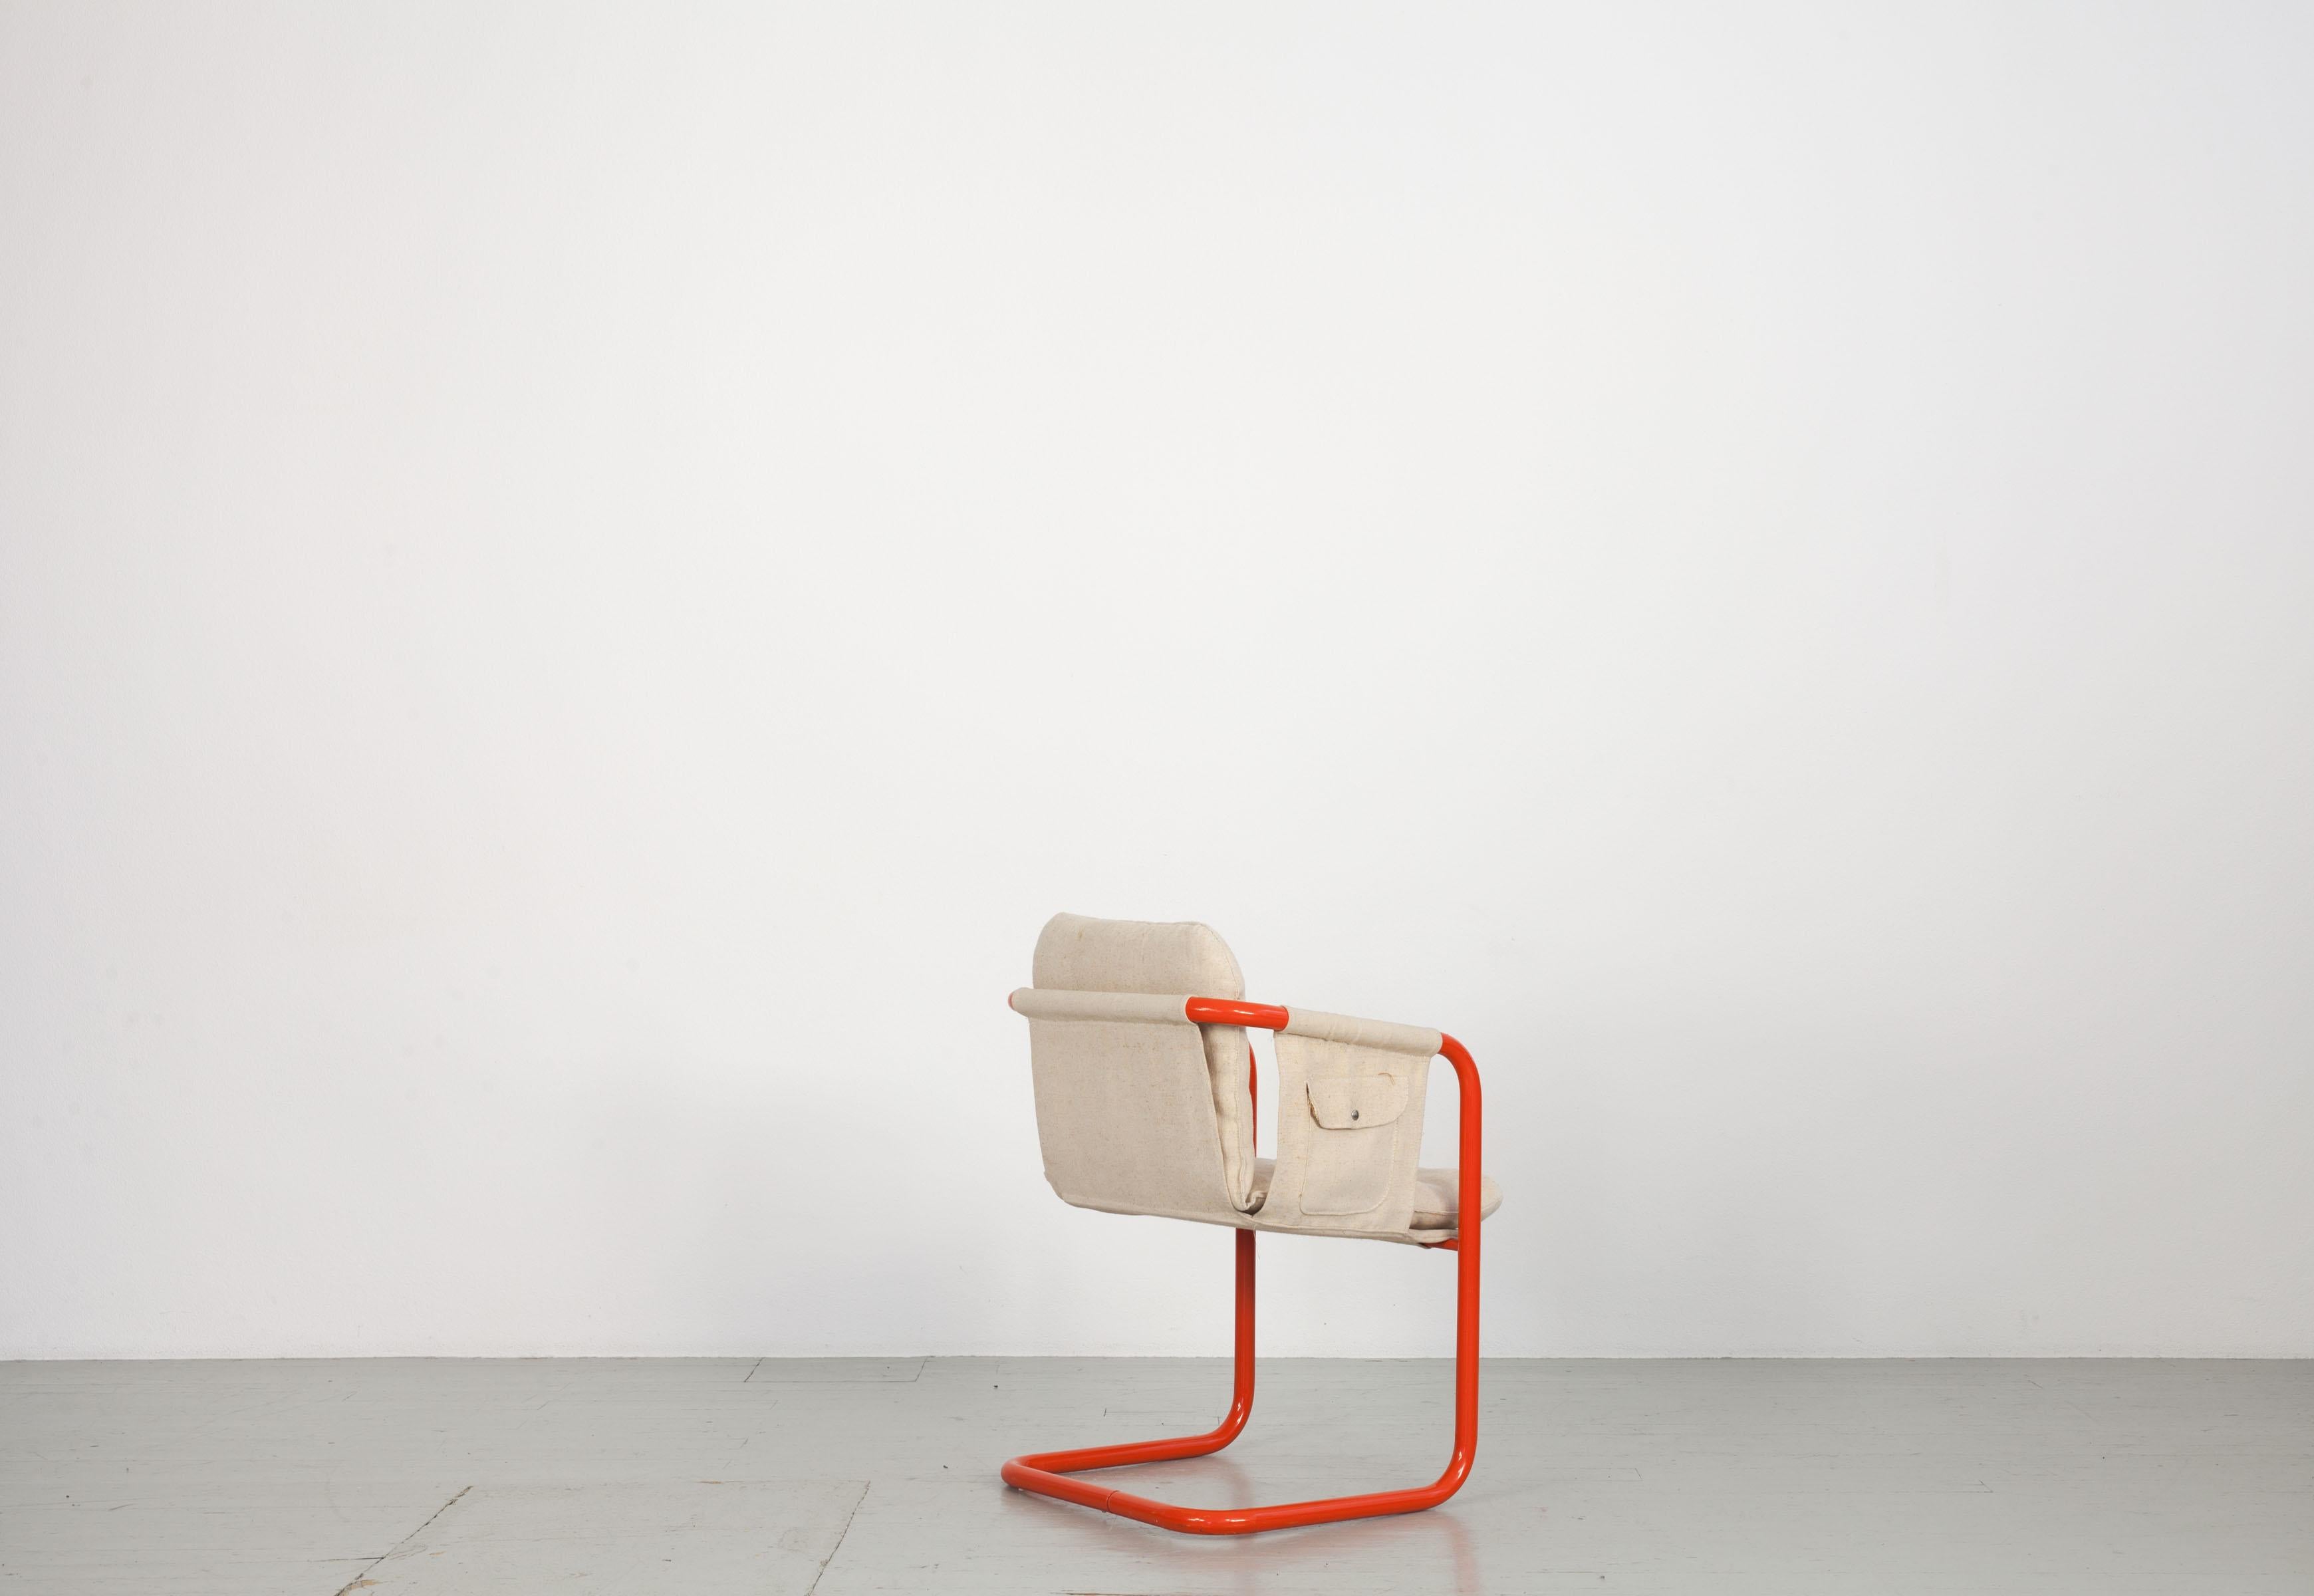 This set of 2 chairs was made in the style of Gae Aulenti. The light linen upholstery contrasts with the orange tubular steel frame. The chairs are in good condition.
Do not hesitate to contact us for further details